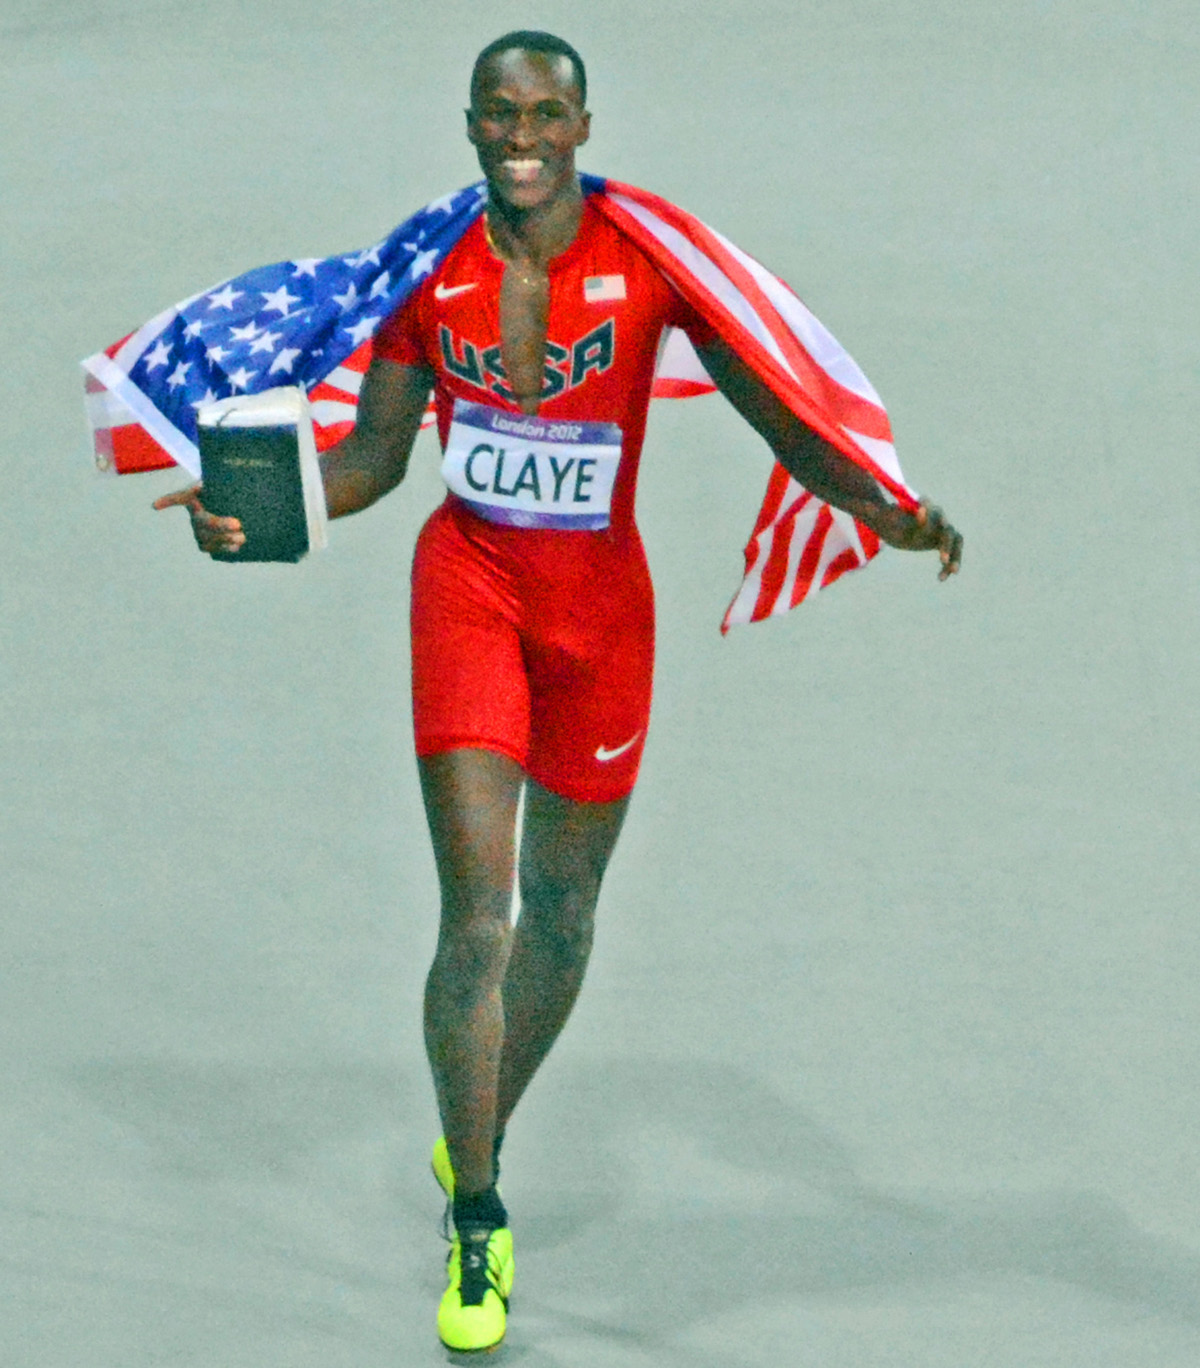 USA CLAYE WILL CELEBRATES WINNING A BROZE MEDAL IN THE MEN'S LONG JUMP